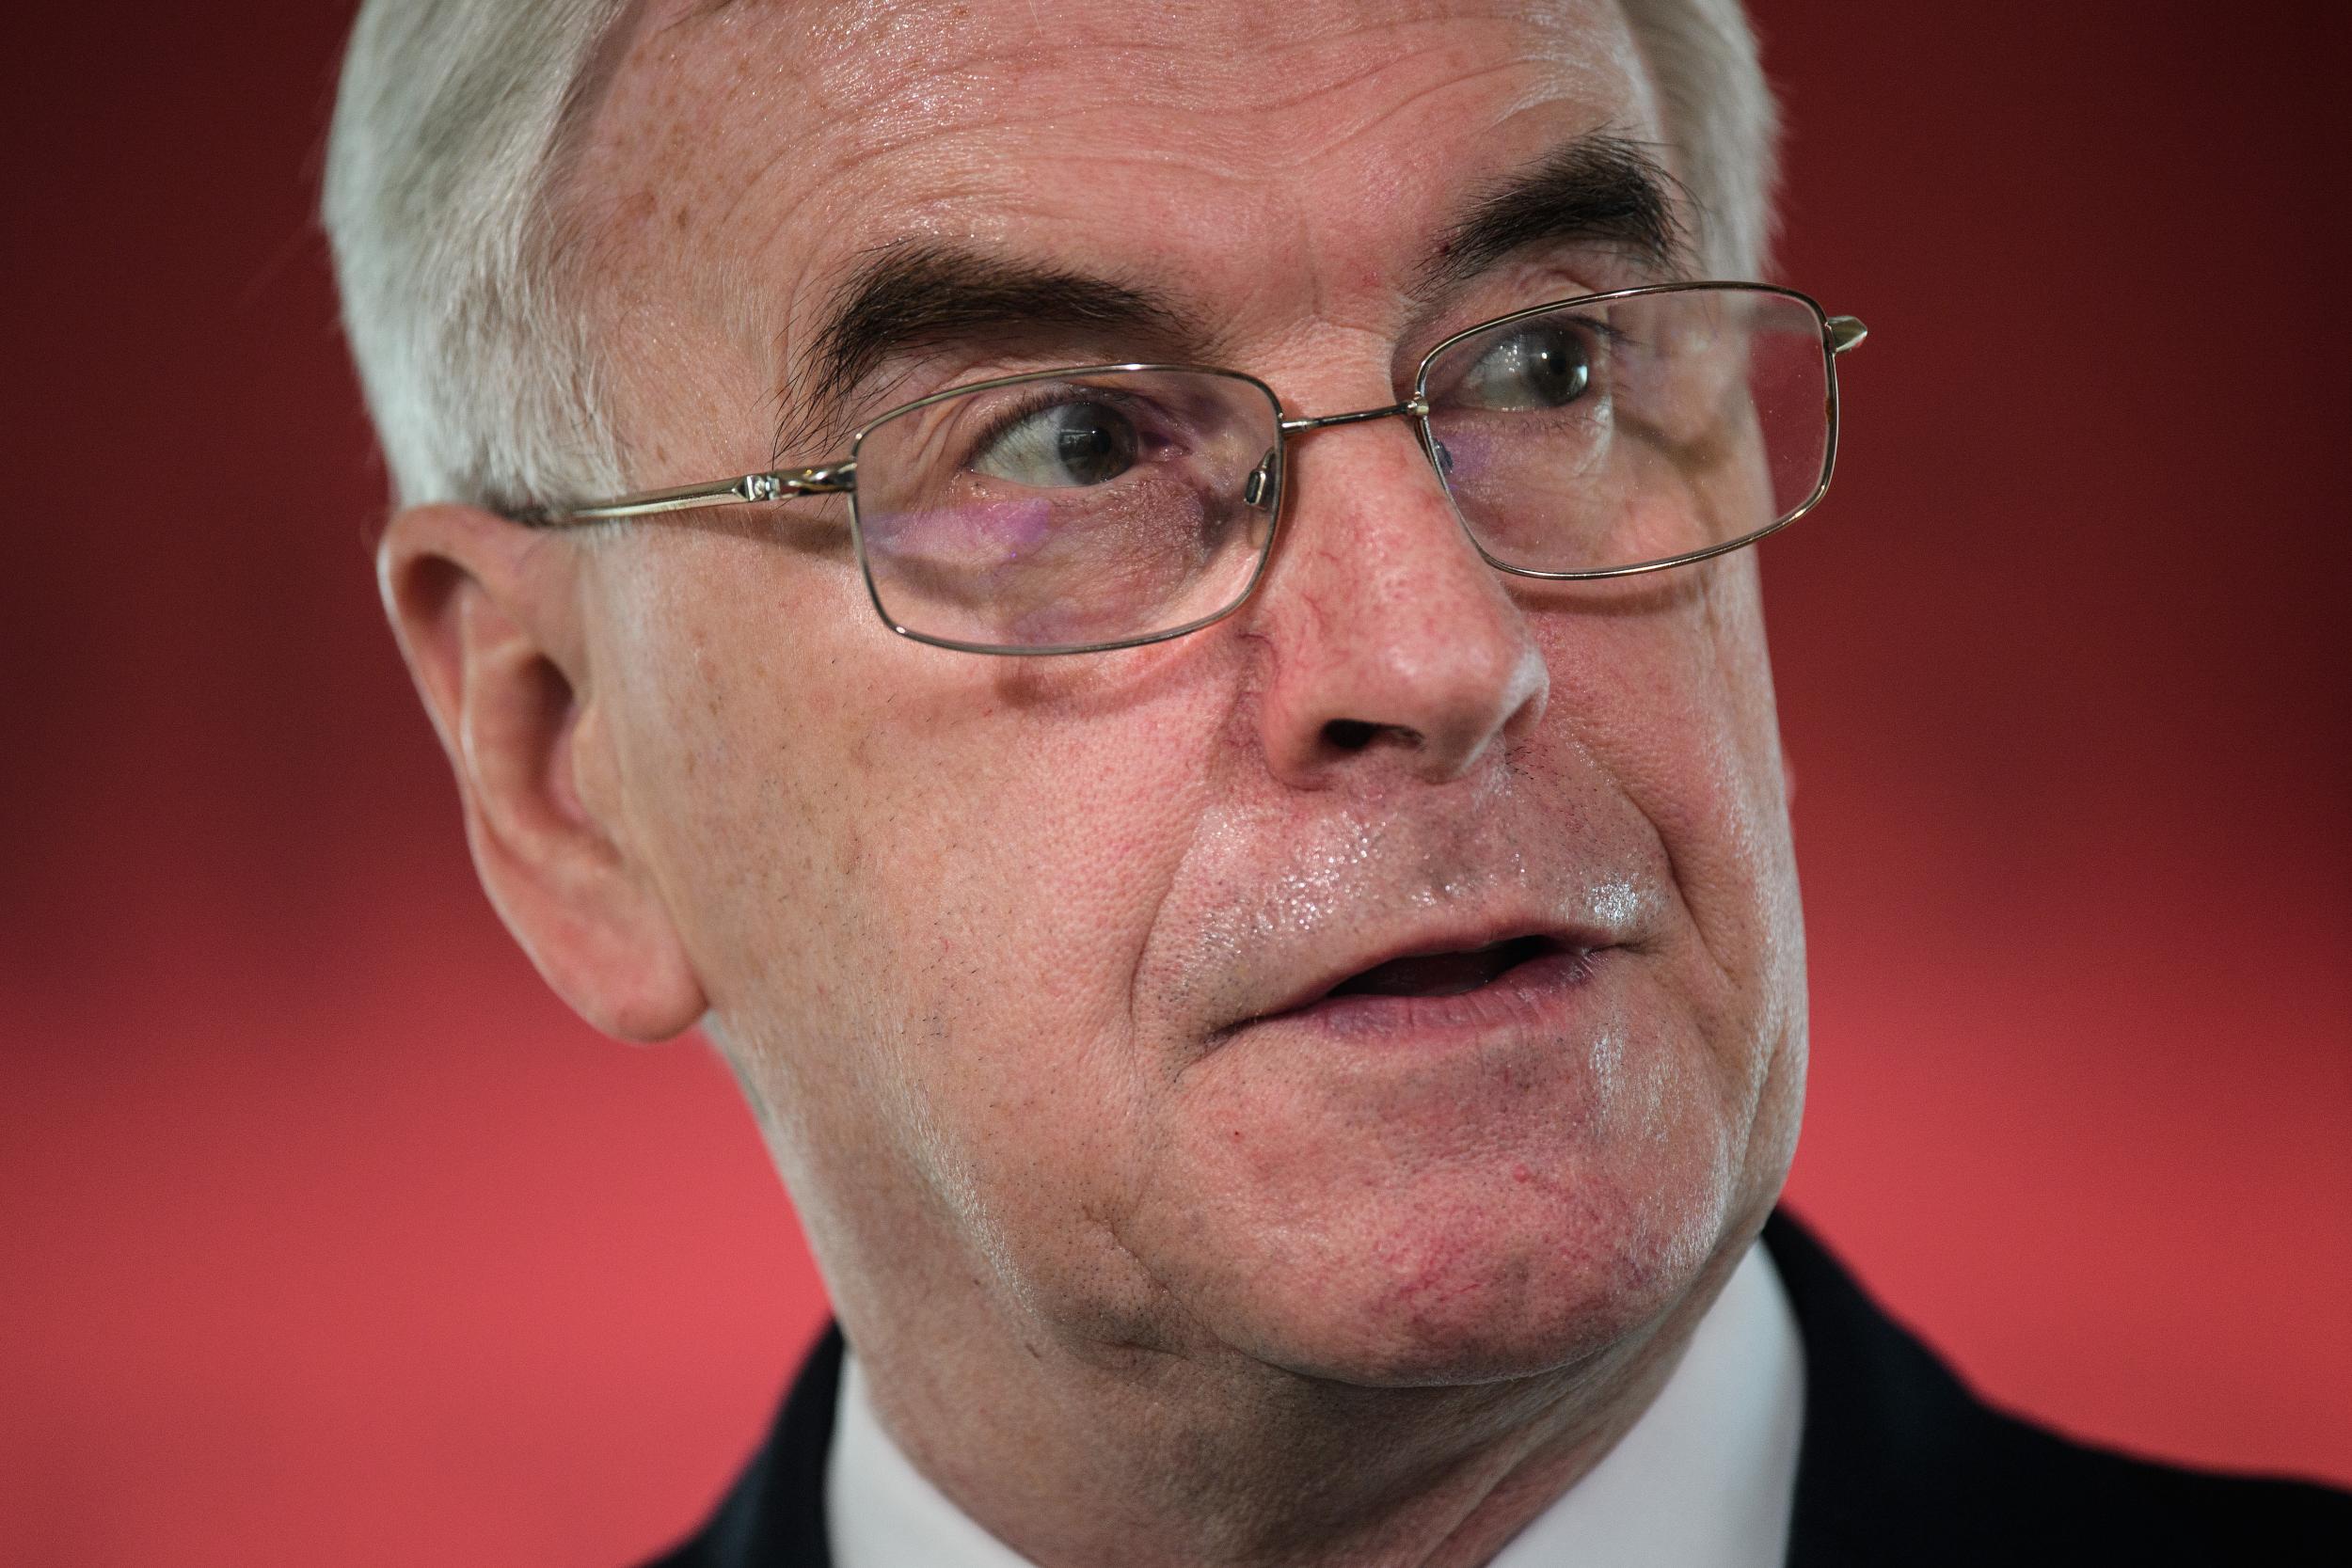 The Shadow Chancellor says he will make it illegal for banks to close high street branches